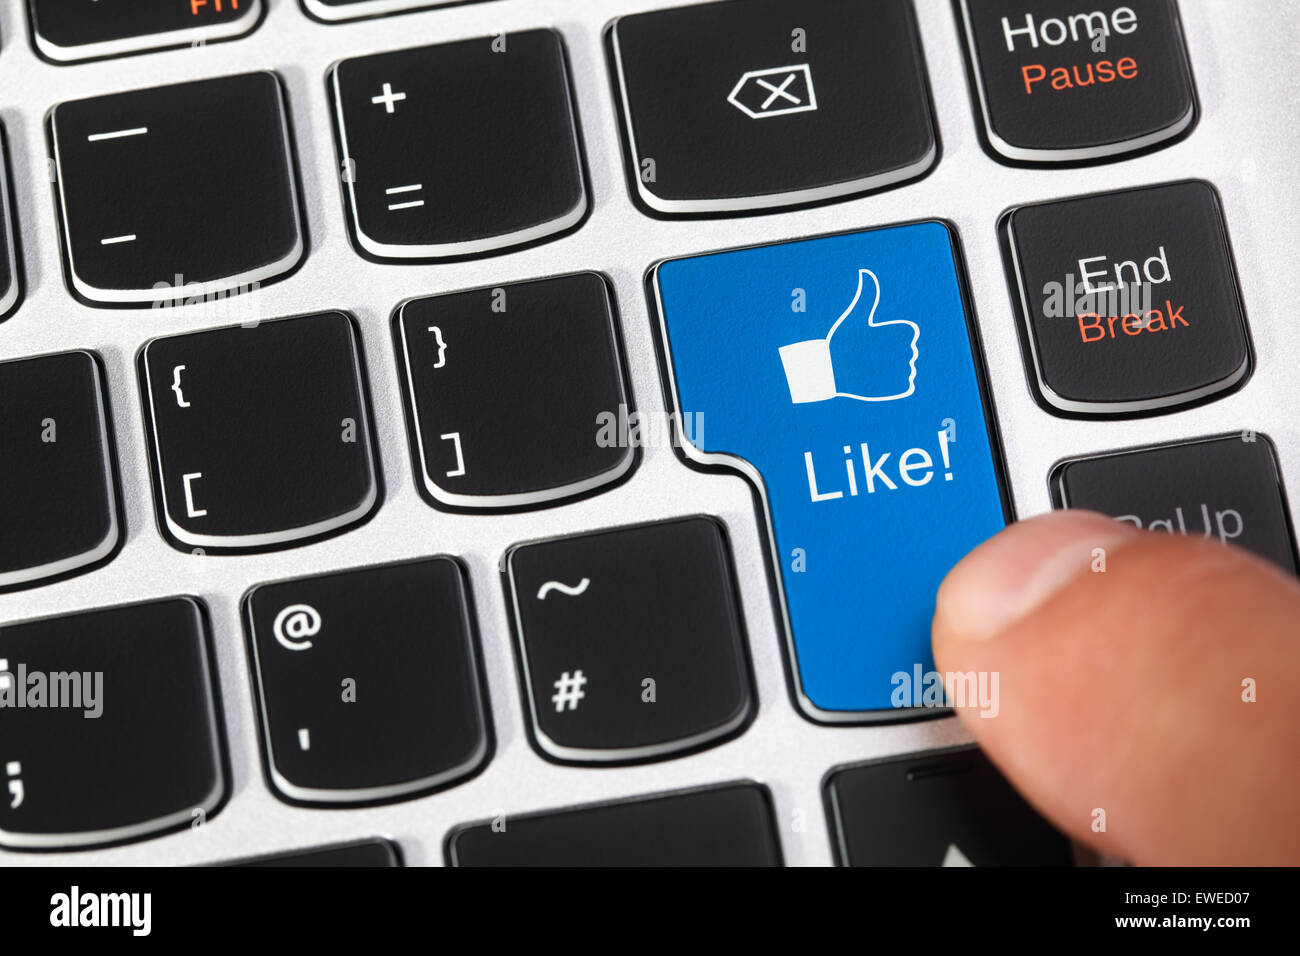 Computer keyboard enter key with like thumbs up icon concept for social media, social networking and approval Stock Photo